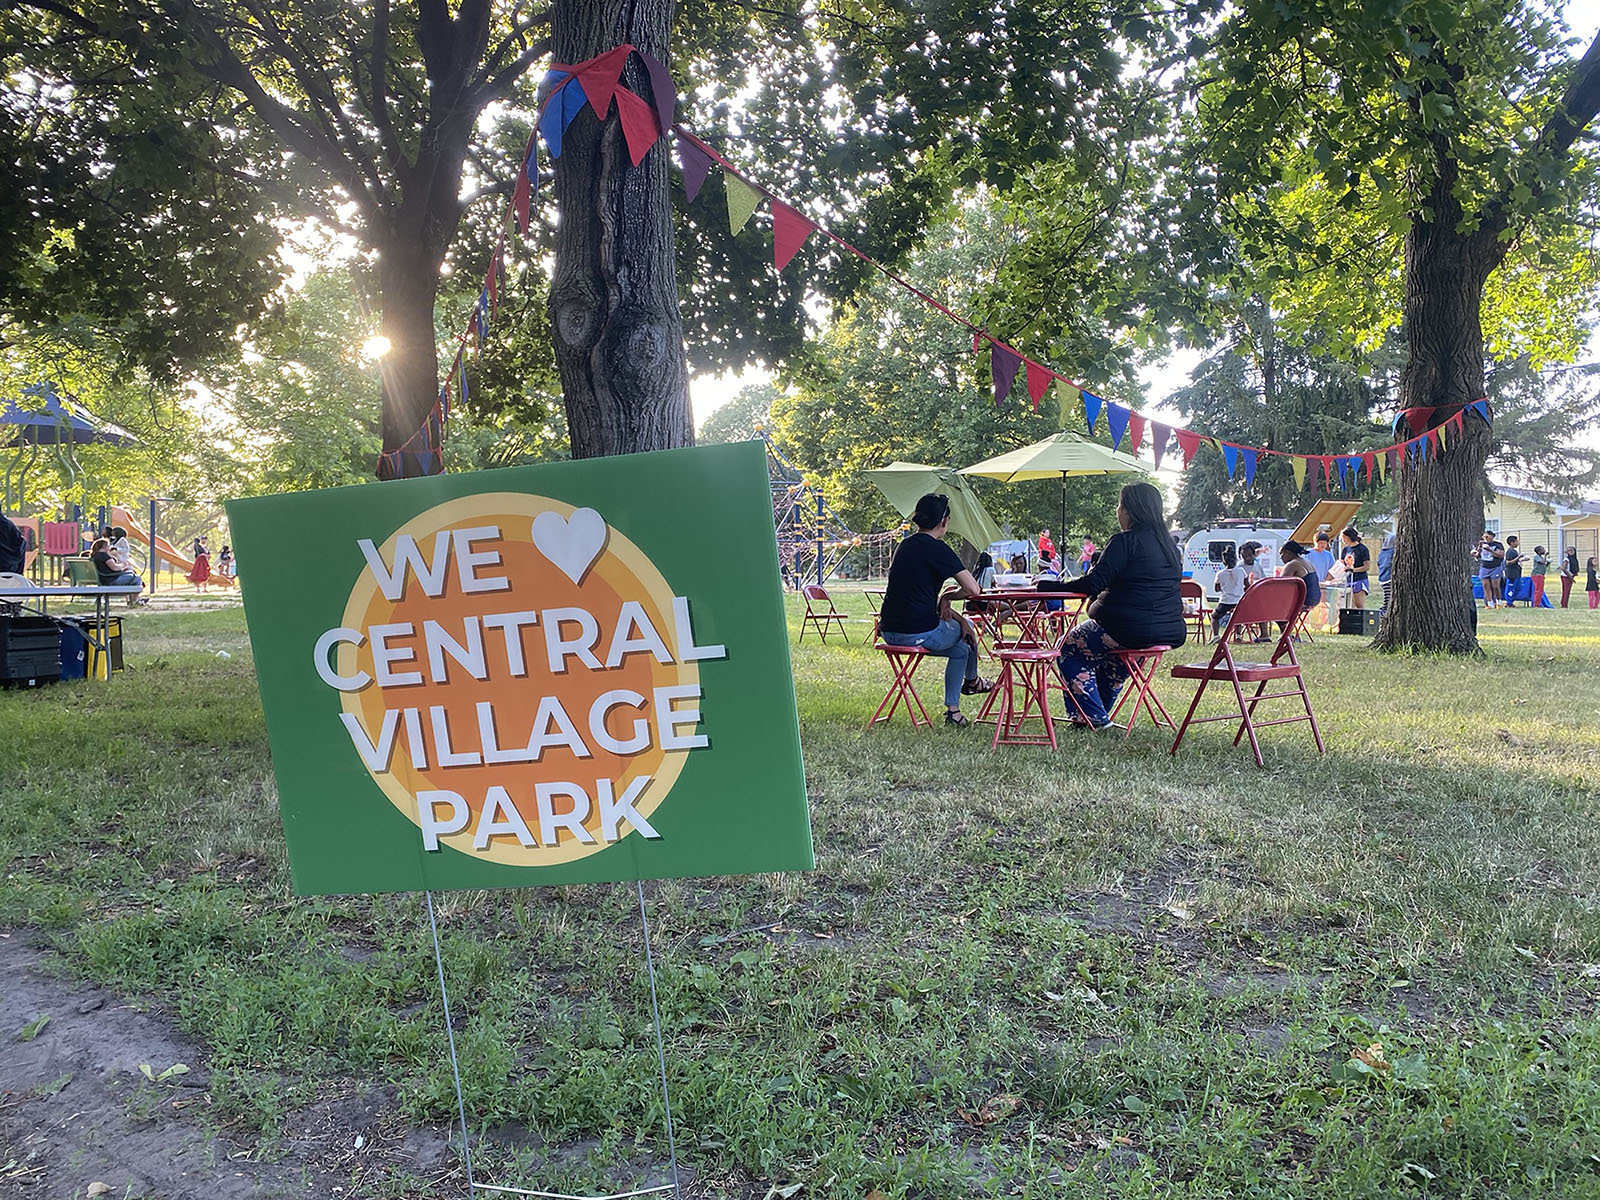 Many people enjoying food and conversations in park, with sign reading "We Love Central Village Park" in foreground